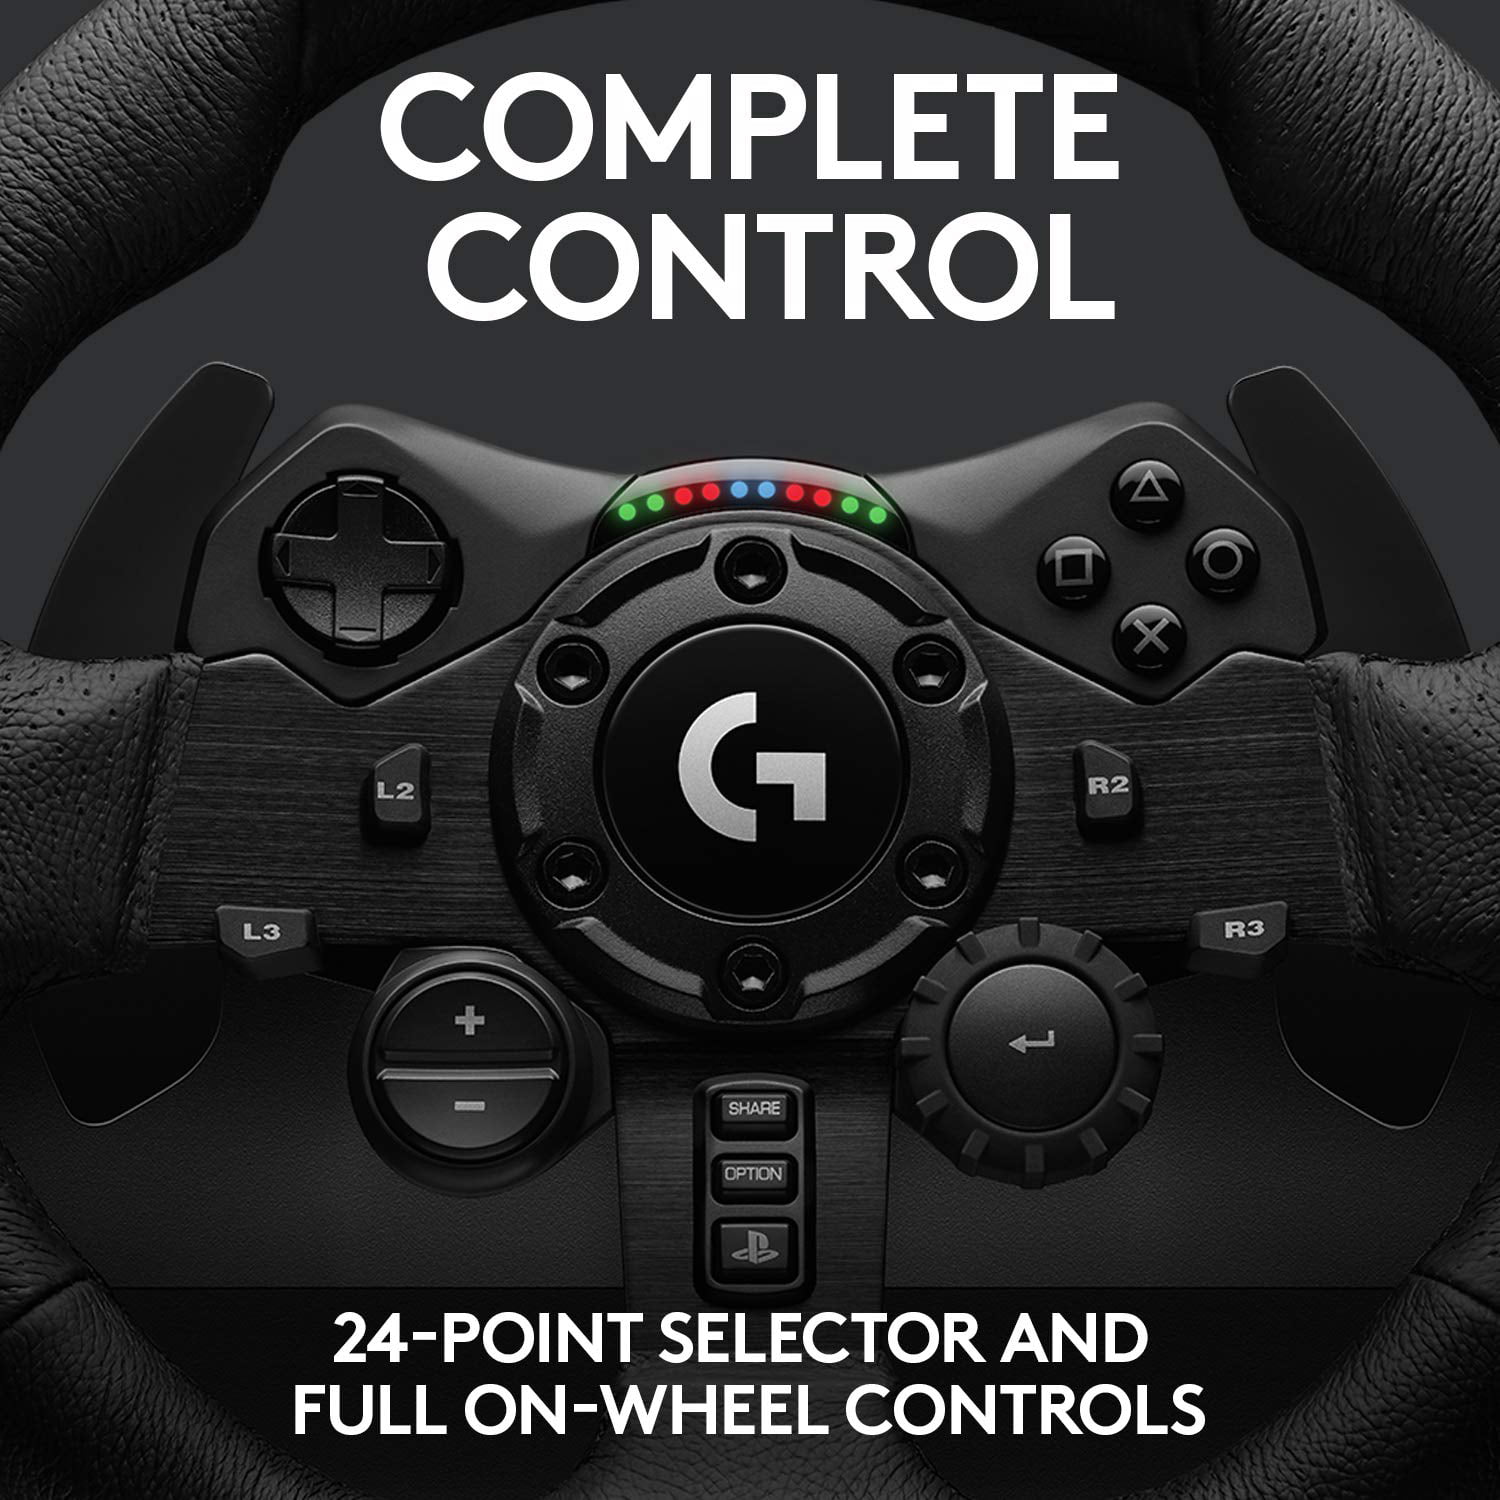 buy Logitech - G923 Racing Wheel and Pedals + Gearshifter + F1 2021 (ps5) -  Bundle online